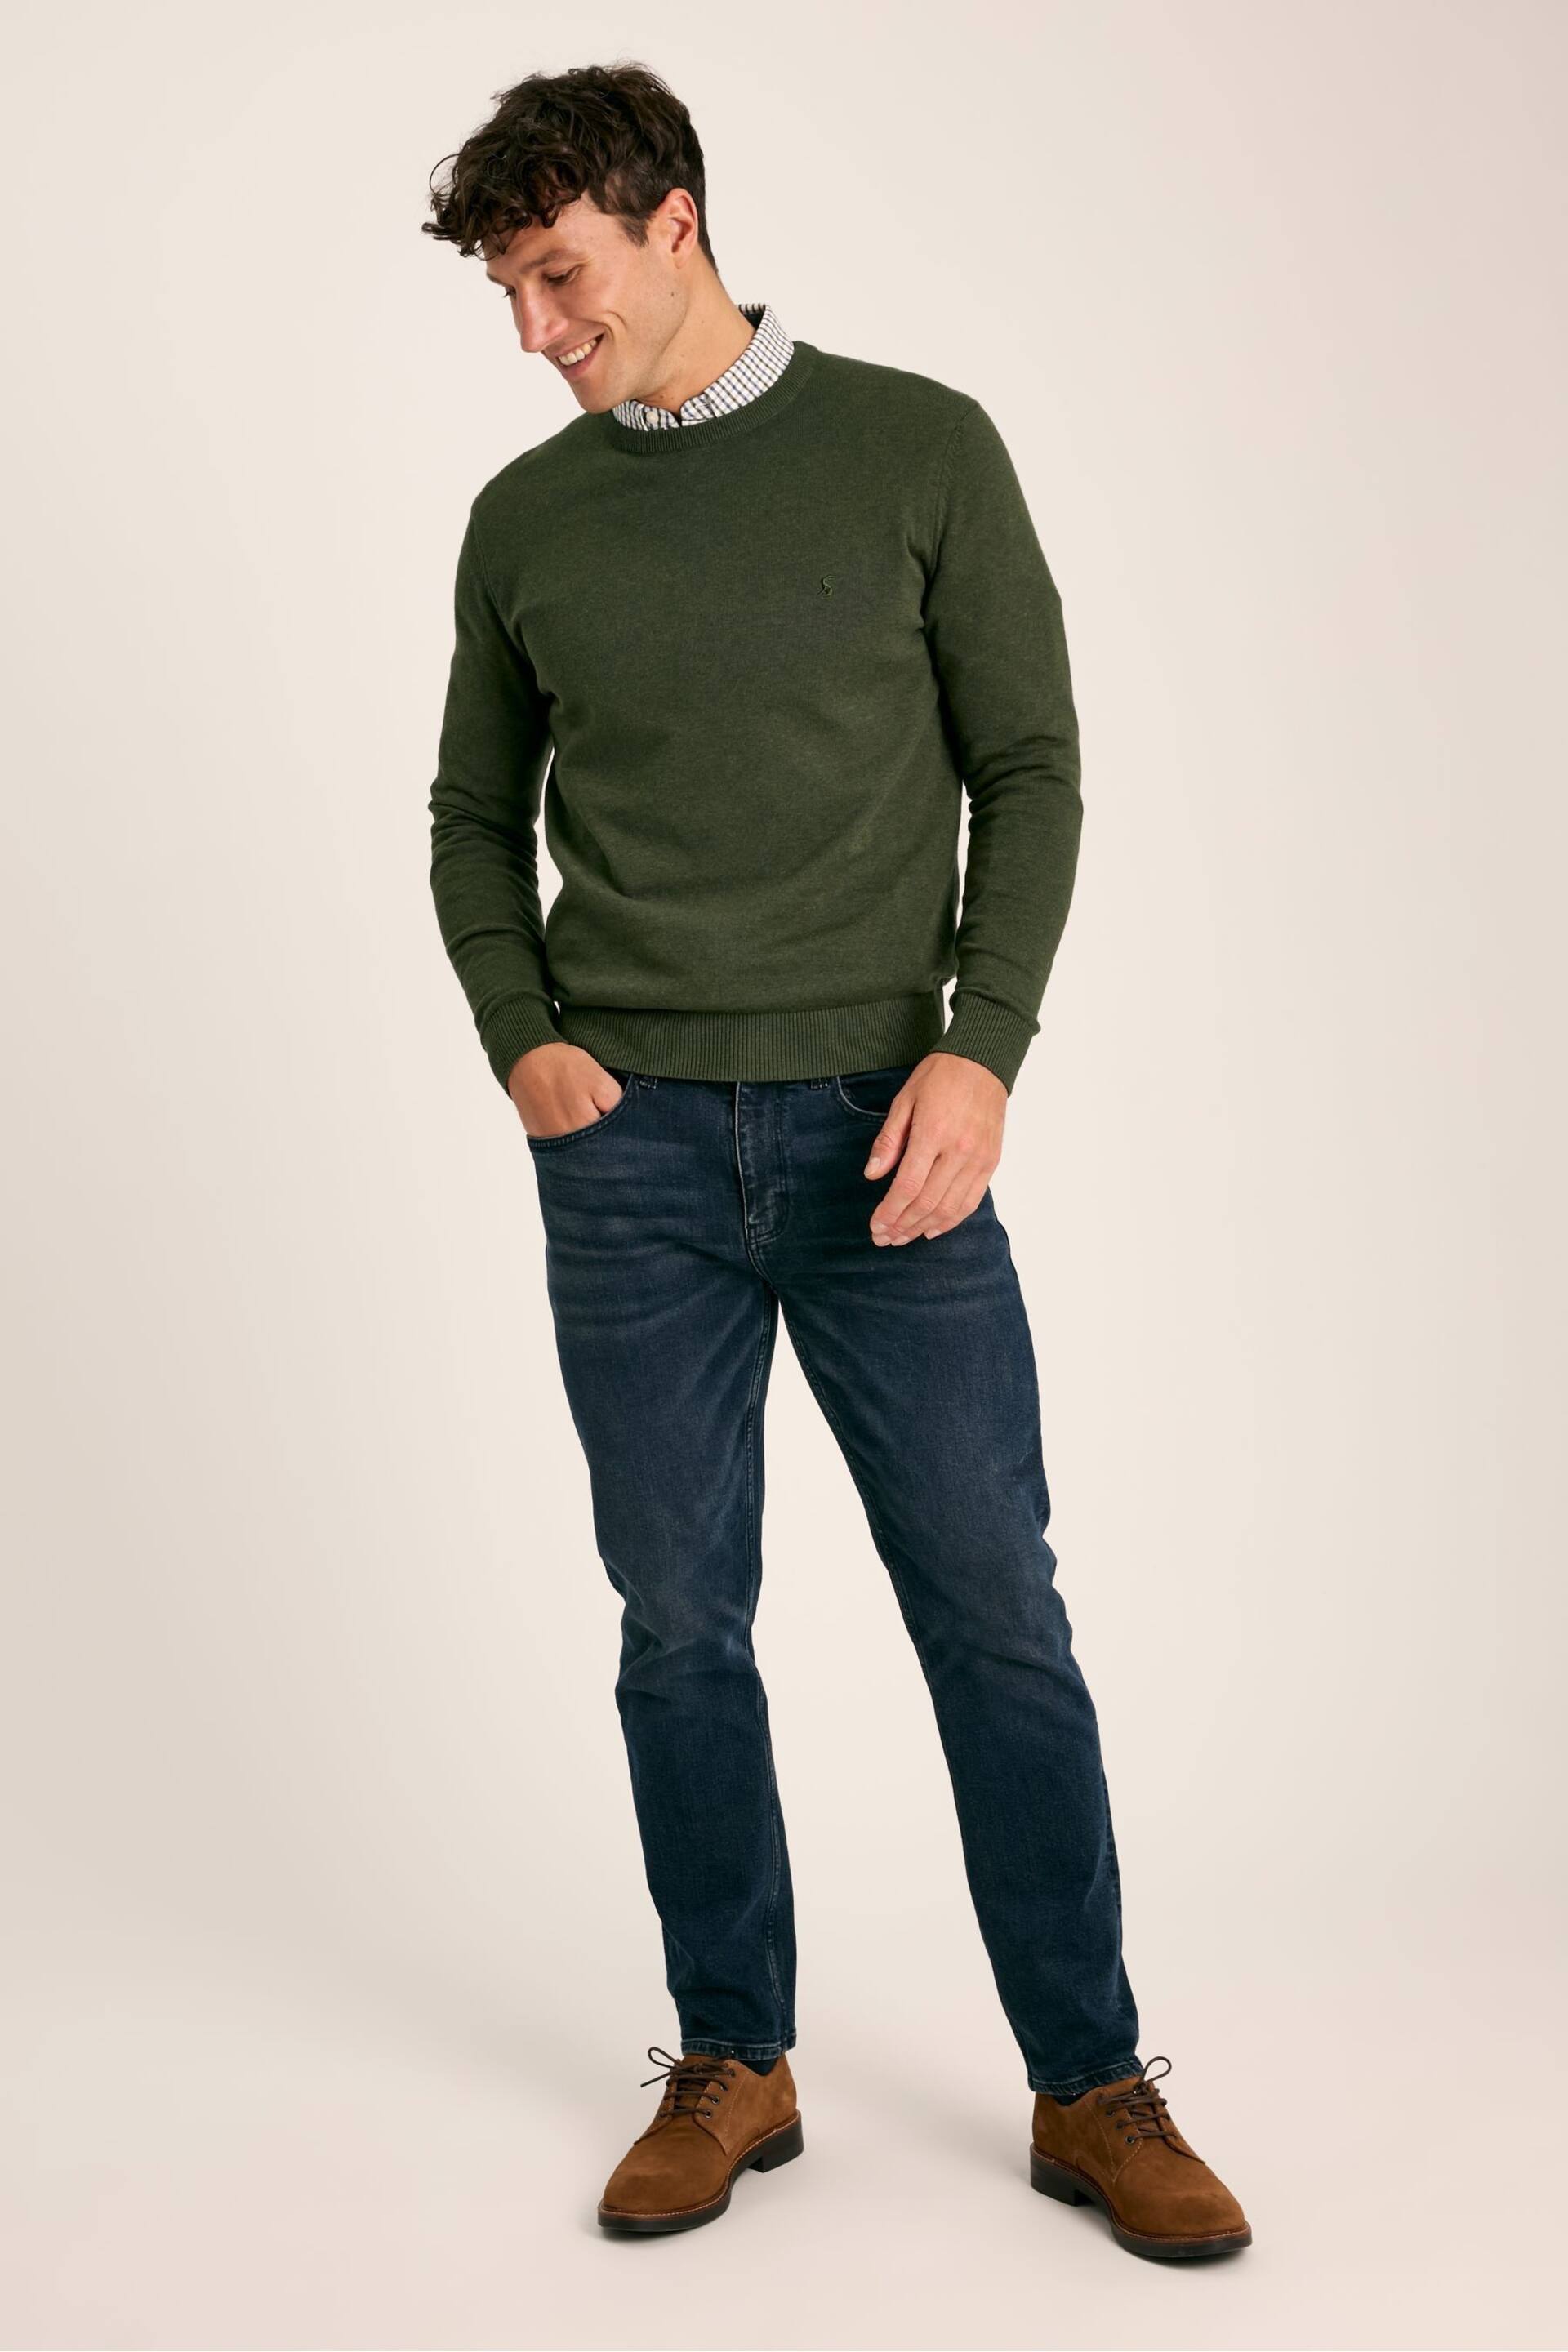 Joules Jarvis Green Crew Neck Knitted Jumper - Image 3 of 6